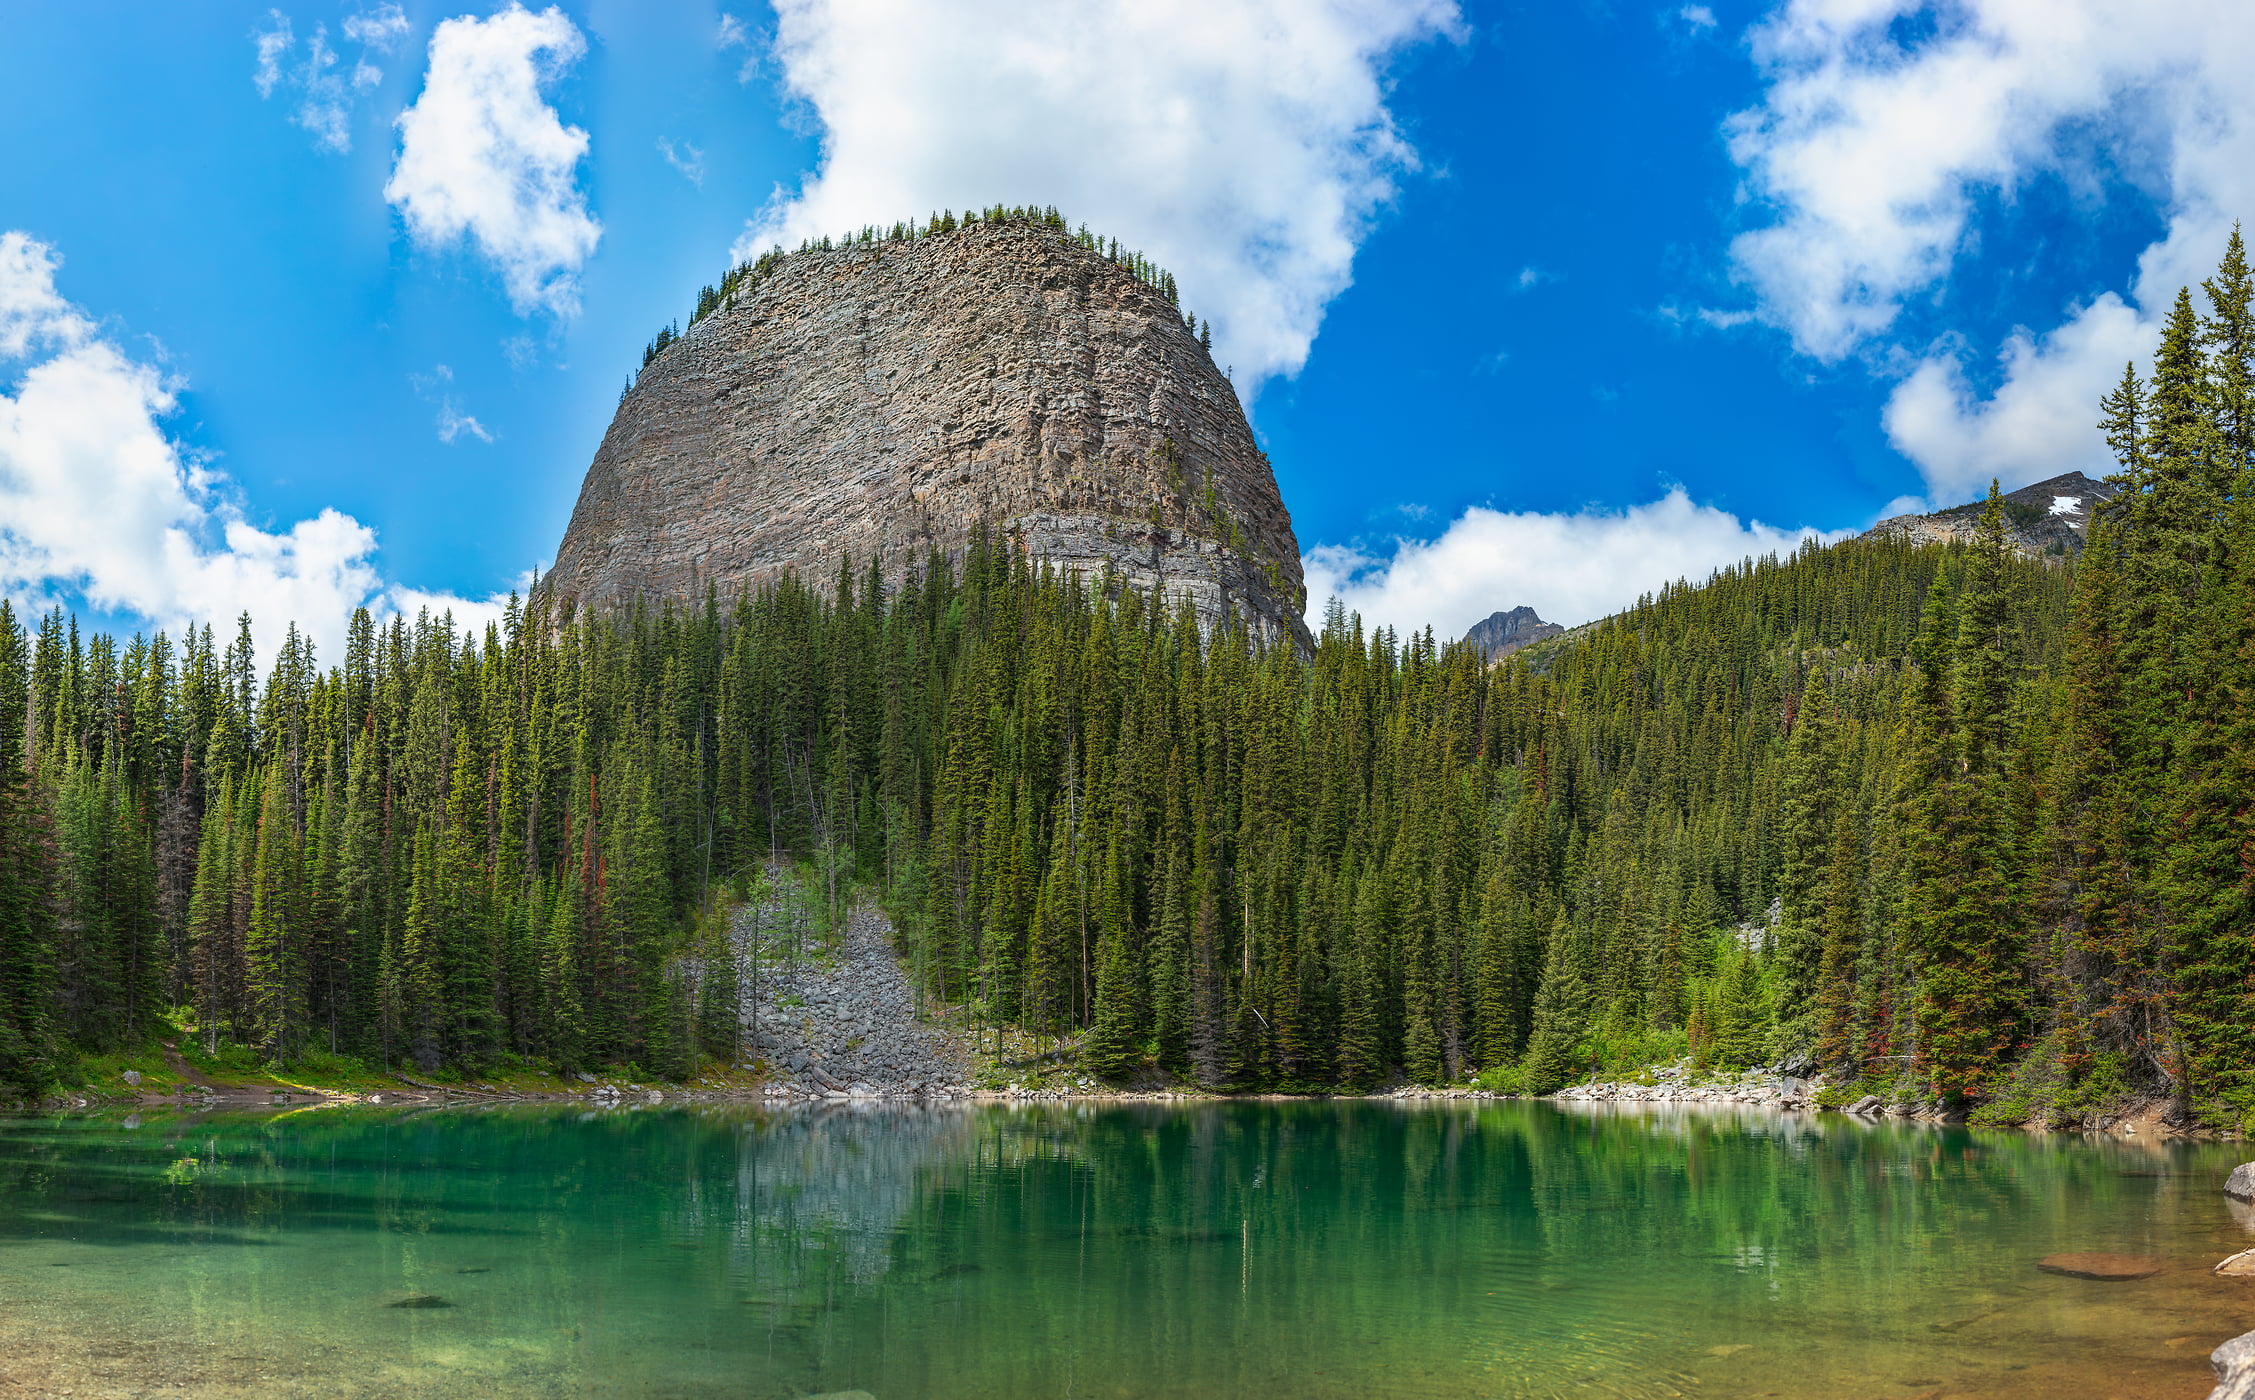 654 megapixels! A very high resolution, large-format VAST photo print of Beehive Mountain in Banff National Park; landscape photograph created by John Freeman at Mirror Lake in Banff National Park, Alberta, Canada.